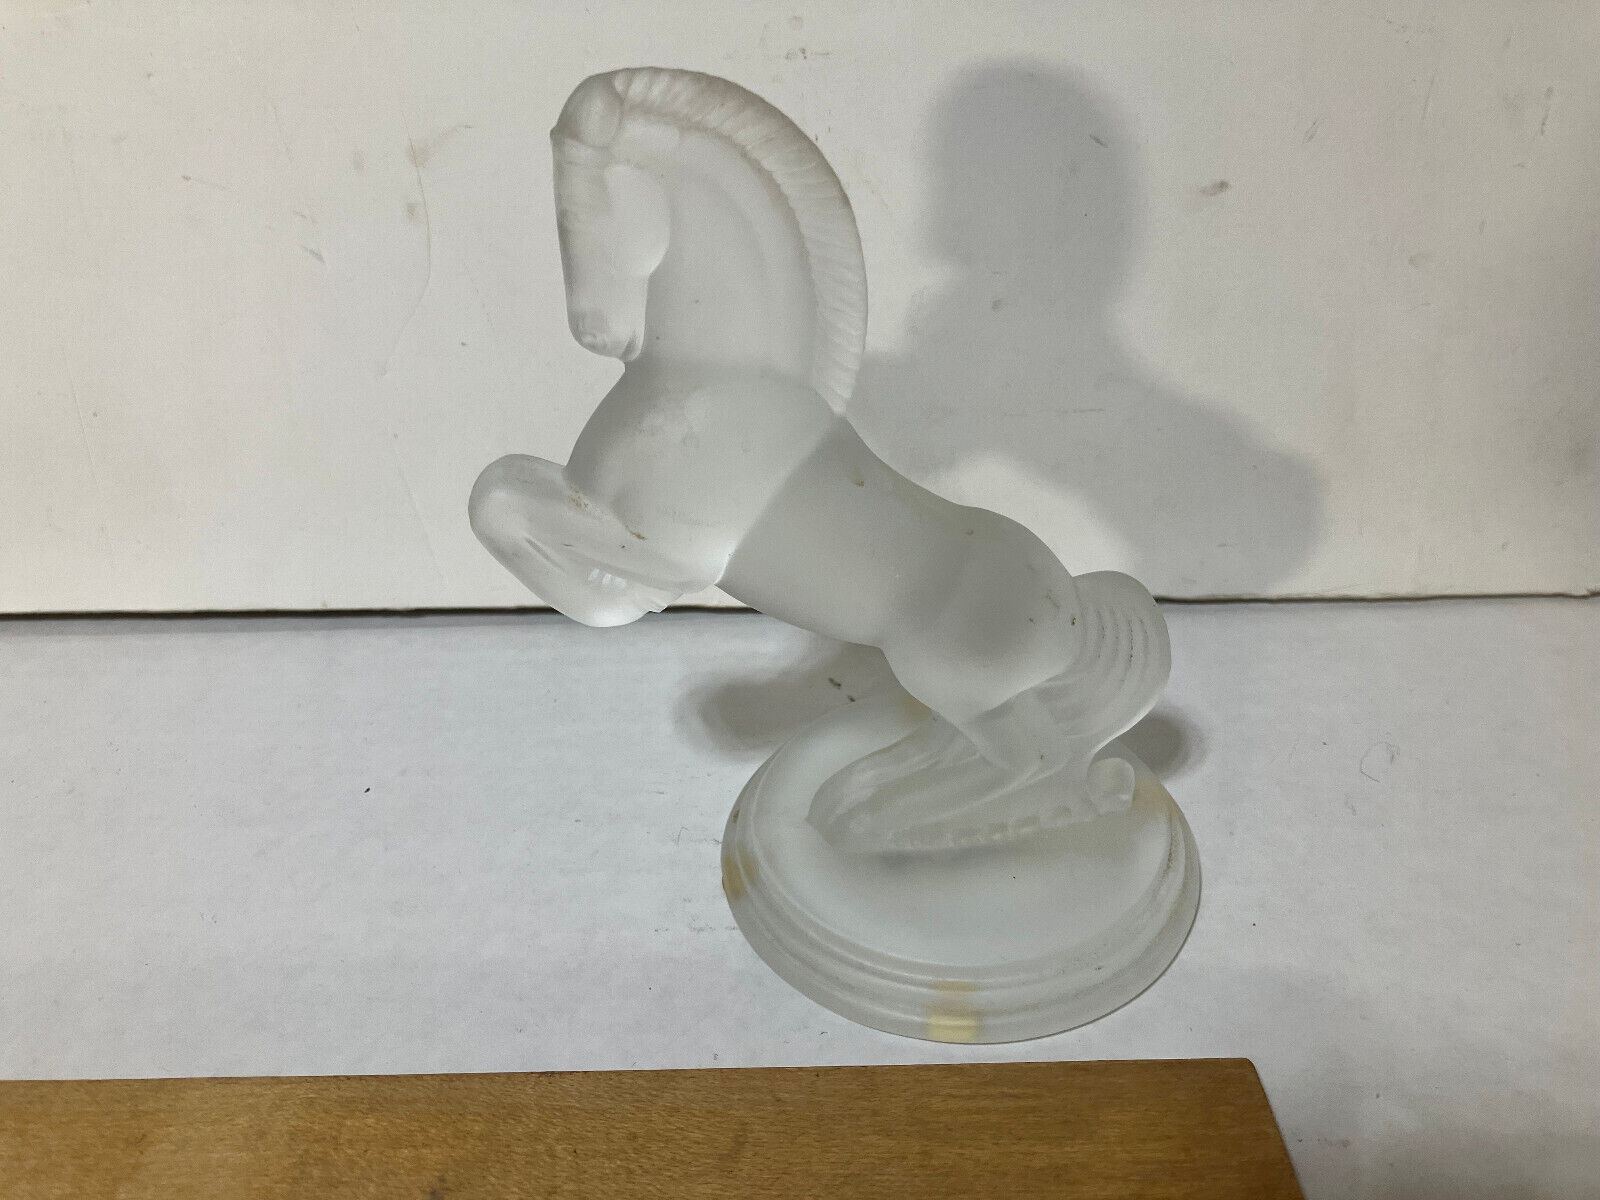 Horse Figurine 1987 Franklin Mint Frosted Glass Art Deco Equestrian